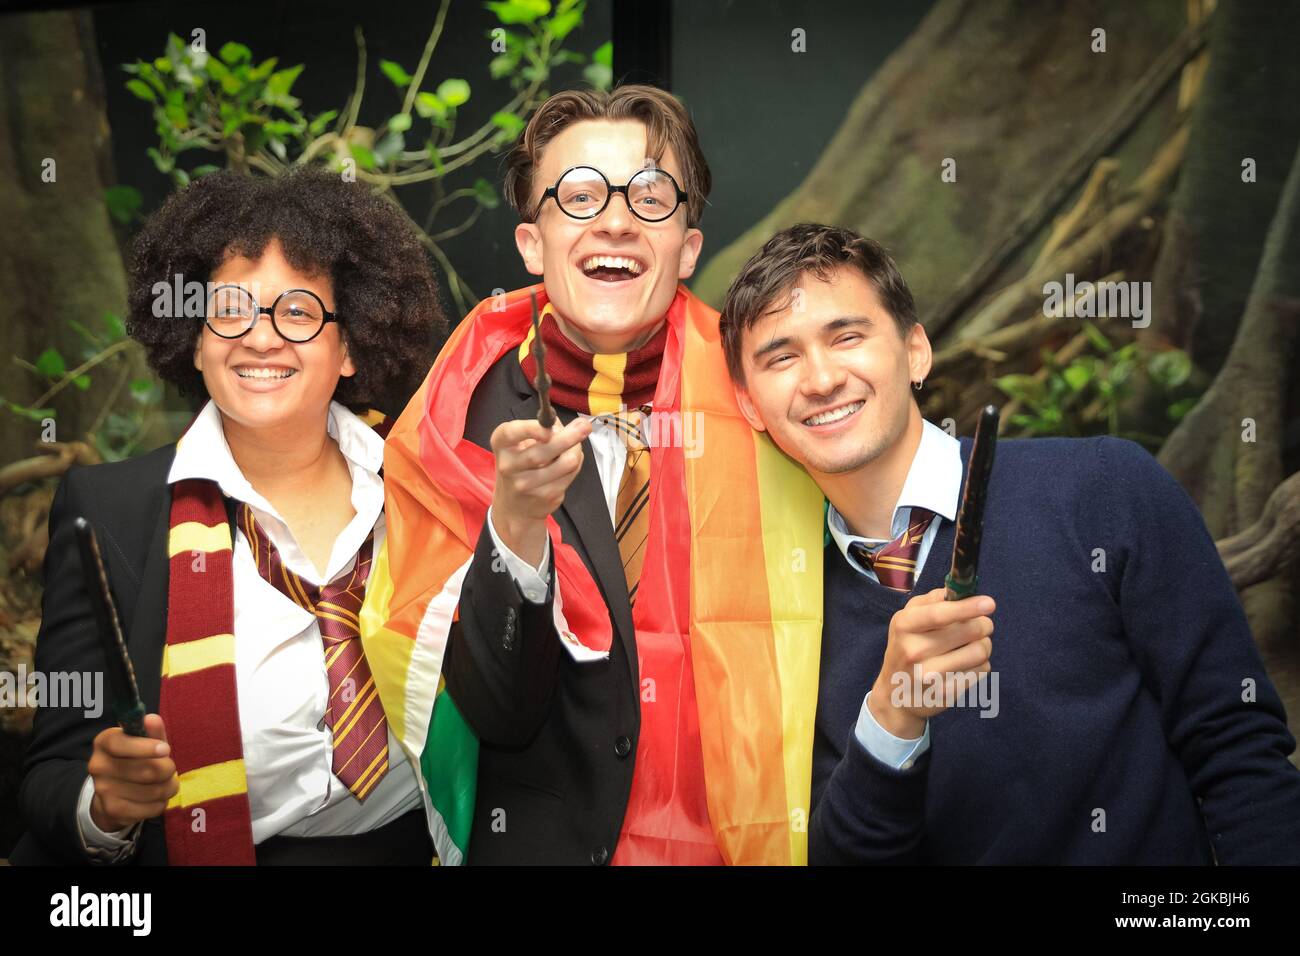 London, UK. 14th Sep, 2021. The acclaimed original cast of ‘Dumbledore Is So Gay' will be returning to serve Harry Potter nostalgia at The Pleasance Theatre this month (Sep 21-26). For the photocall they gather at ZSL London Zoo's Reptile House, an iconic spot from Harry Potter and the Philosopher's Stone, in costumes that celebrate the central character Jack's super-fan status. Reuniting to tell this optimistic story of self-love and friendship are actors Alex Britt as Jack, Max Percy as Ollie/Martin and Charlotte Dowding as Gemma/Sally/Madame DuBois. Credit: Imageplotter/Alamy Live News Stock Photo